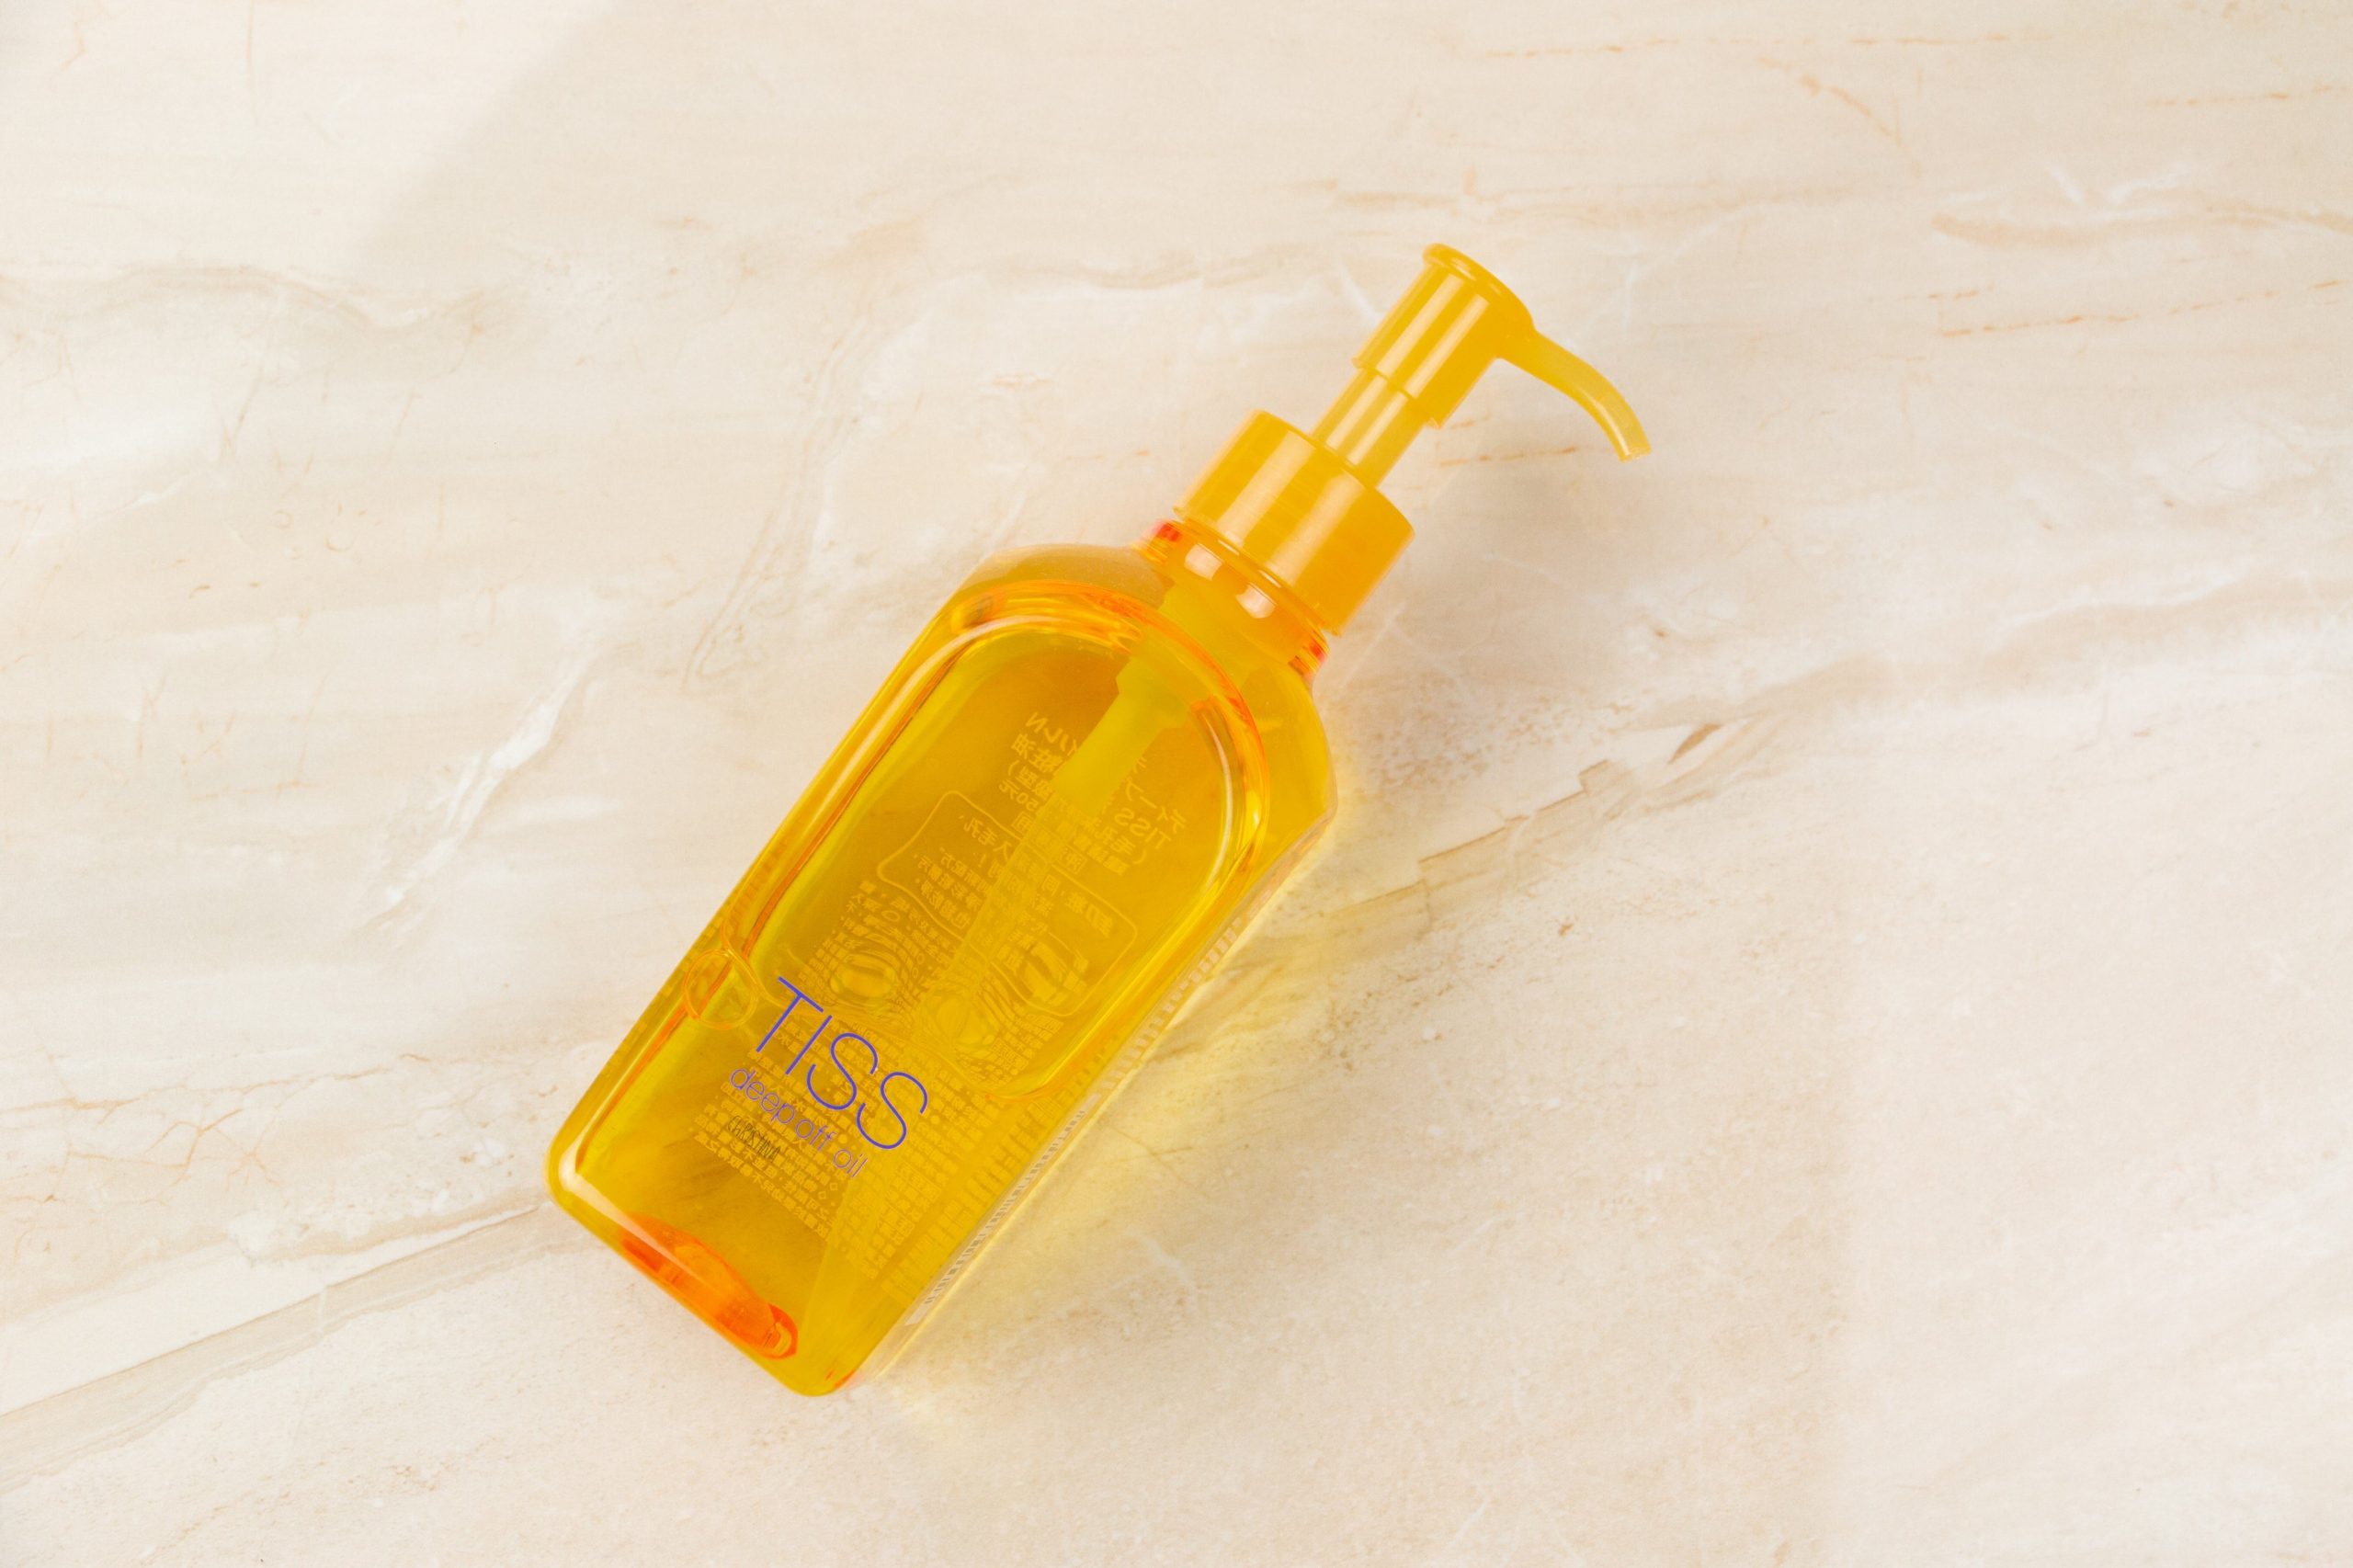 Affordable cleansing oil